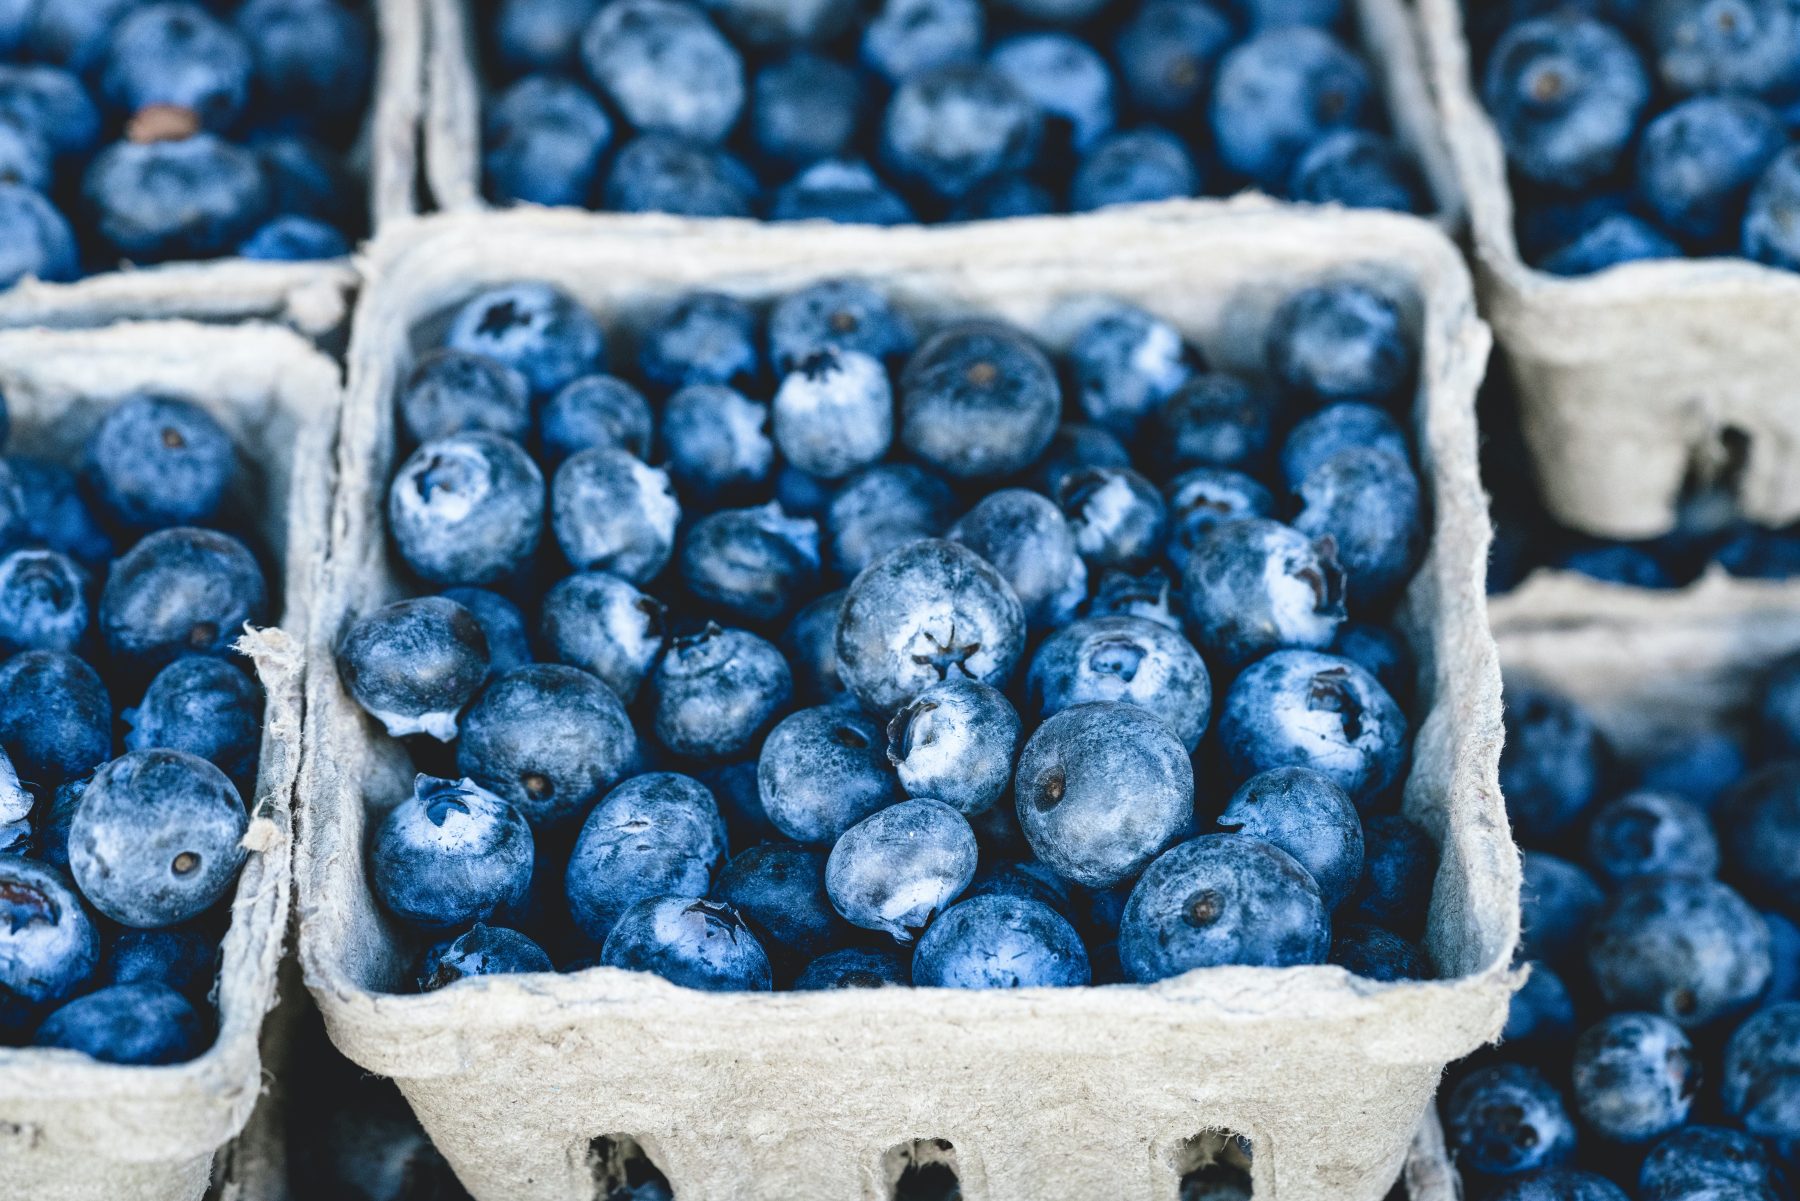 cartons of blueberries